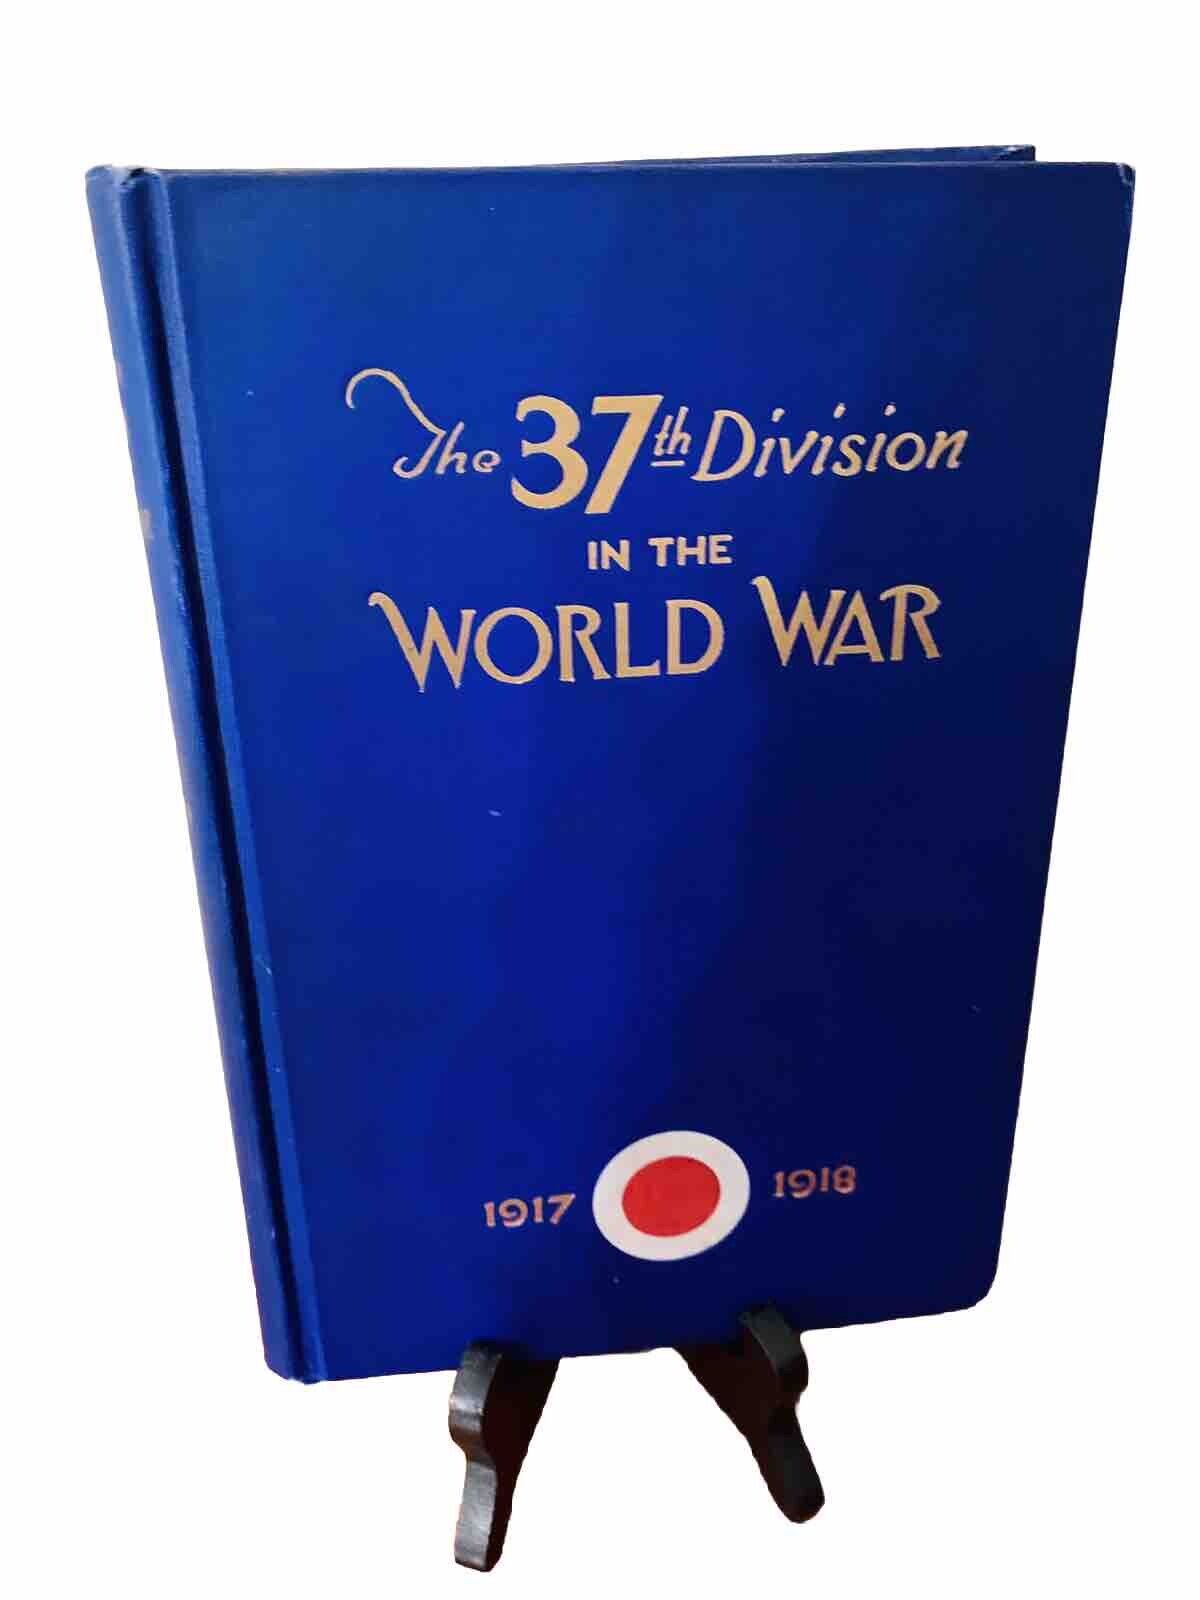 1926 The 37th Division In The World War 1917-1918 Hardcover History BOOK